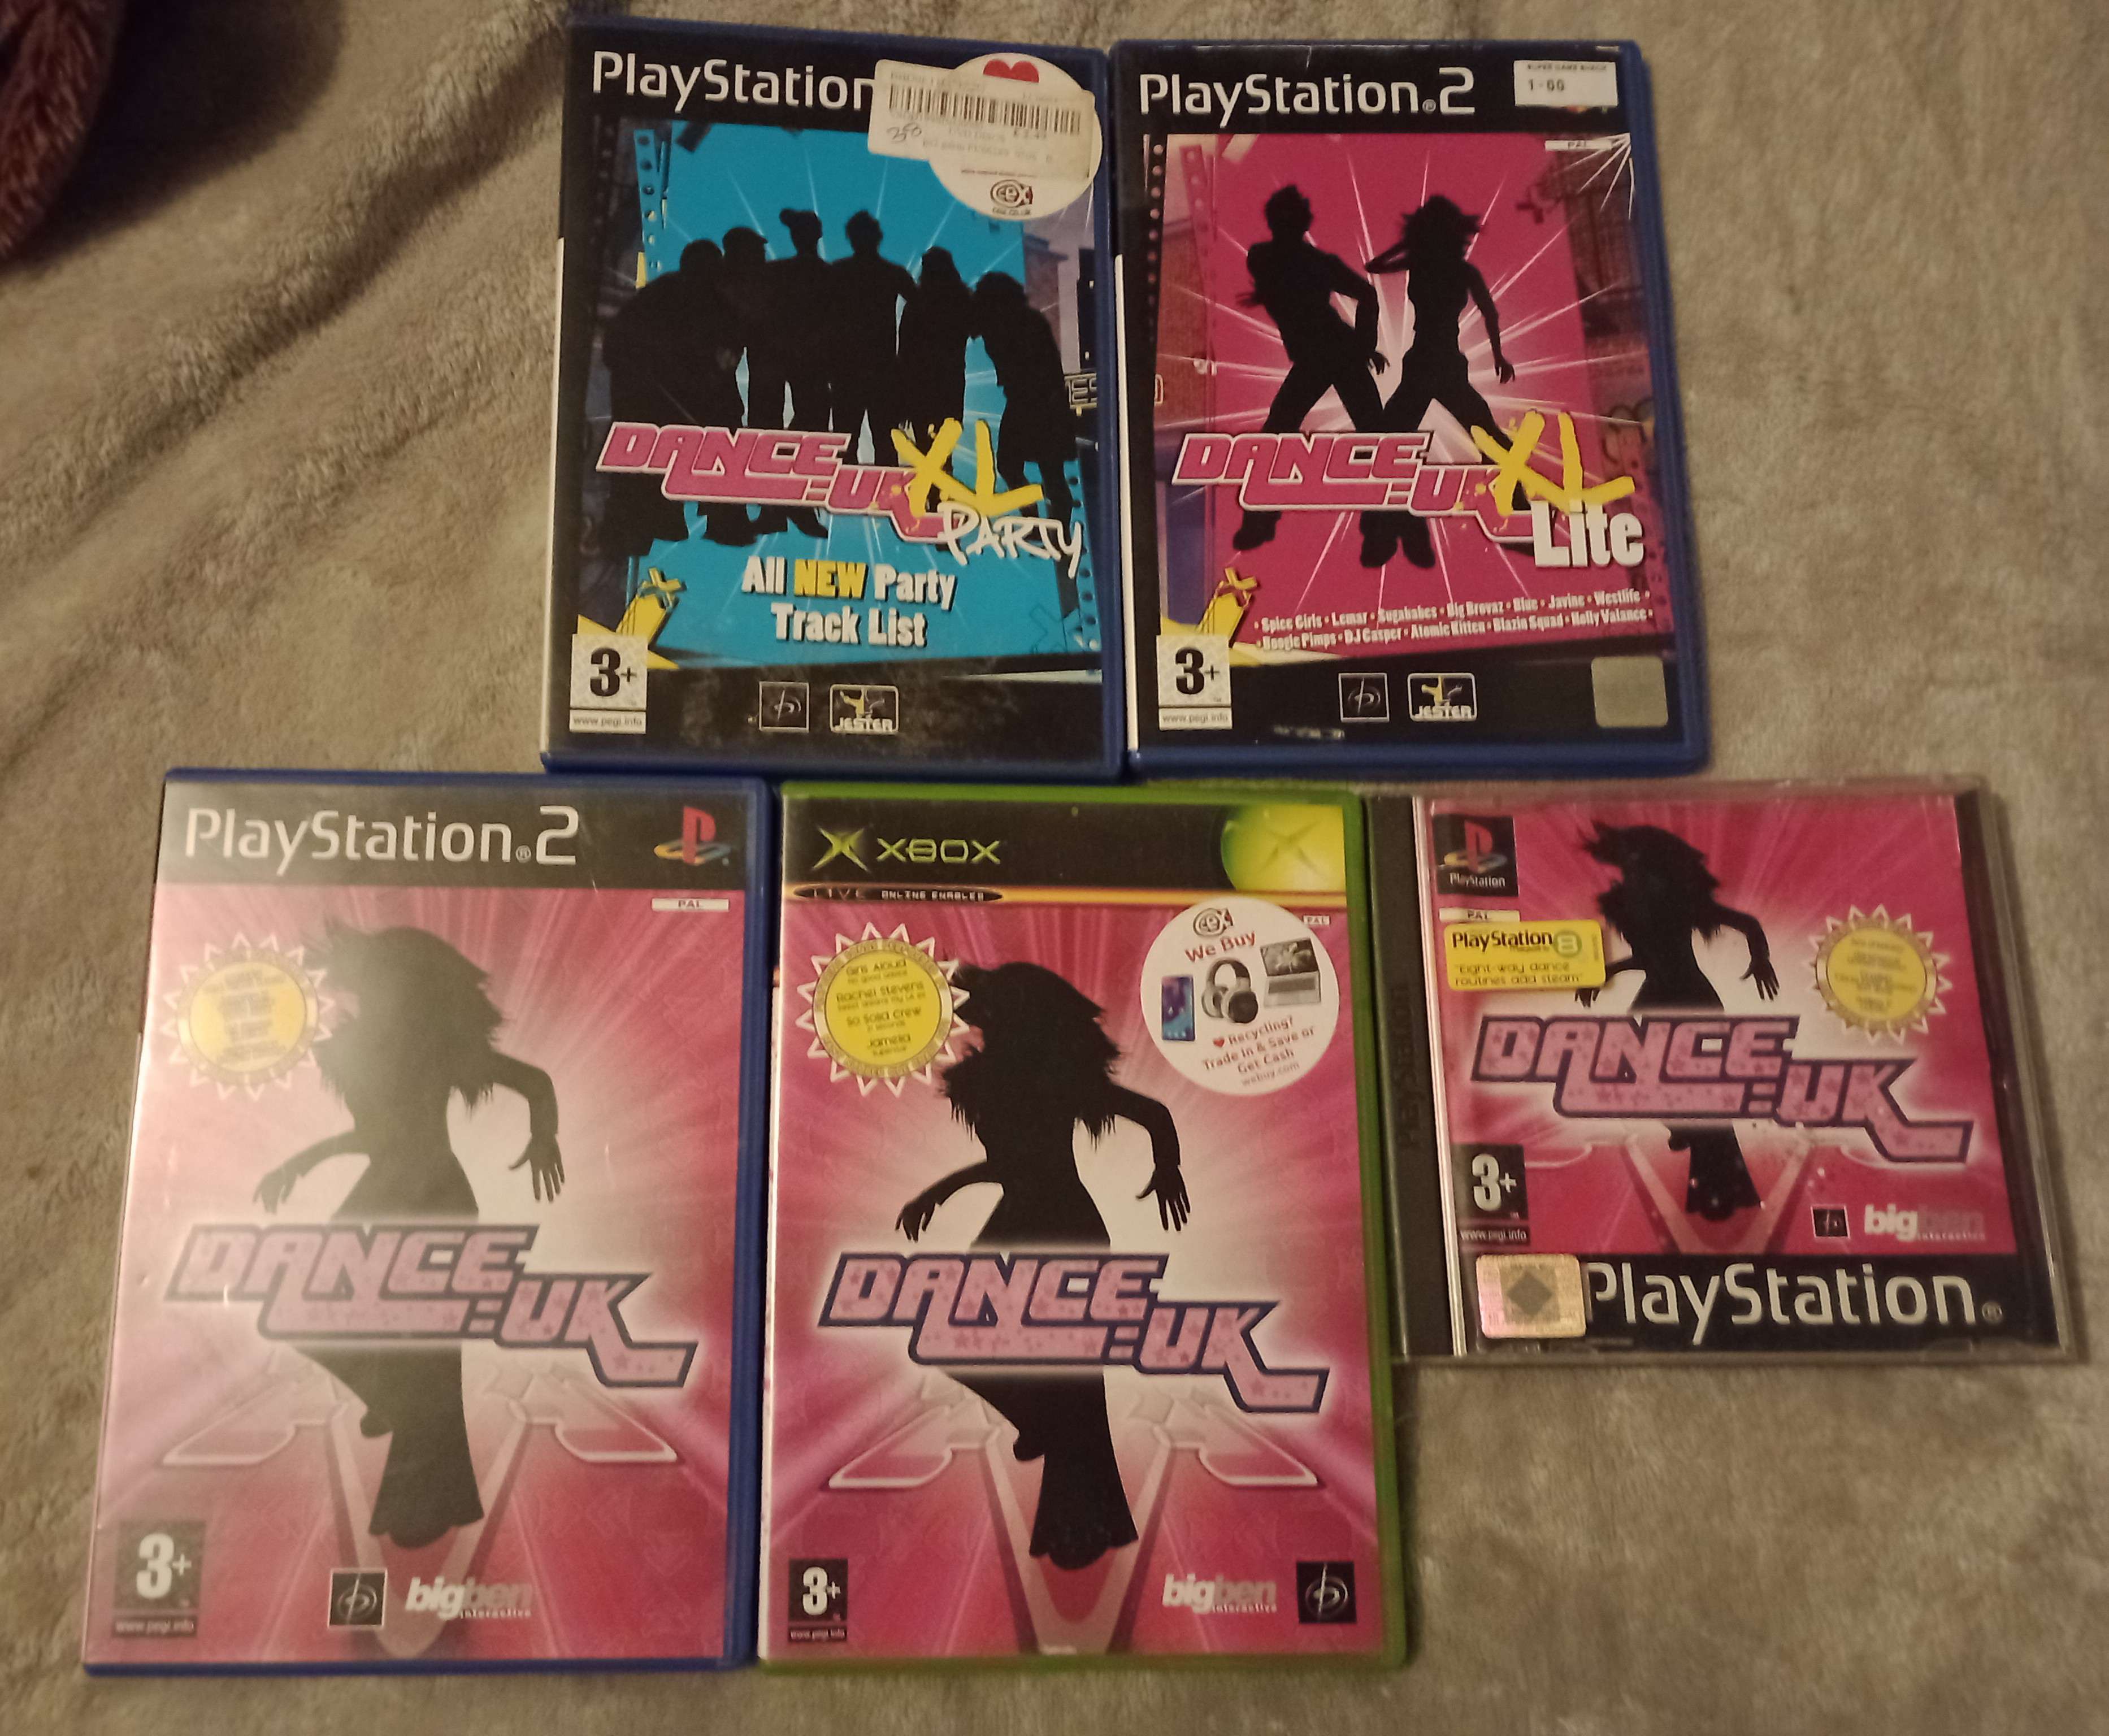 five of the DANCE:UK games laid out. DANCE:UK on the XBOX, PS2, and PS1, as well as DANCE:UK XL Lite and DANCE:UK XL Party for the PS2.